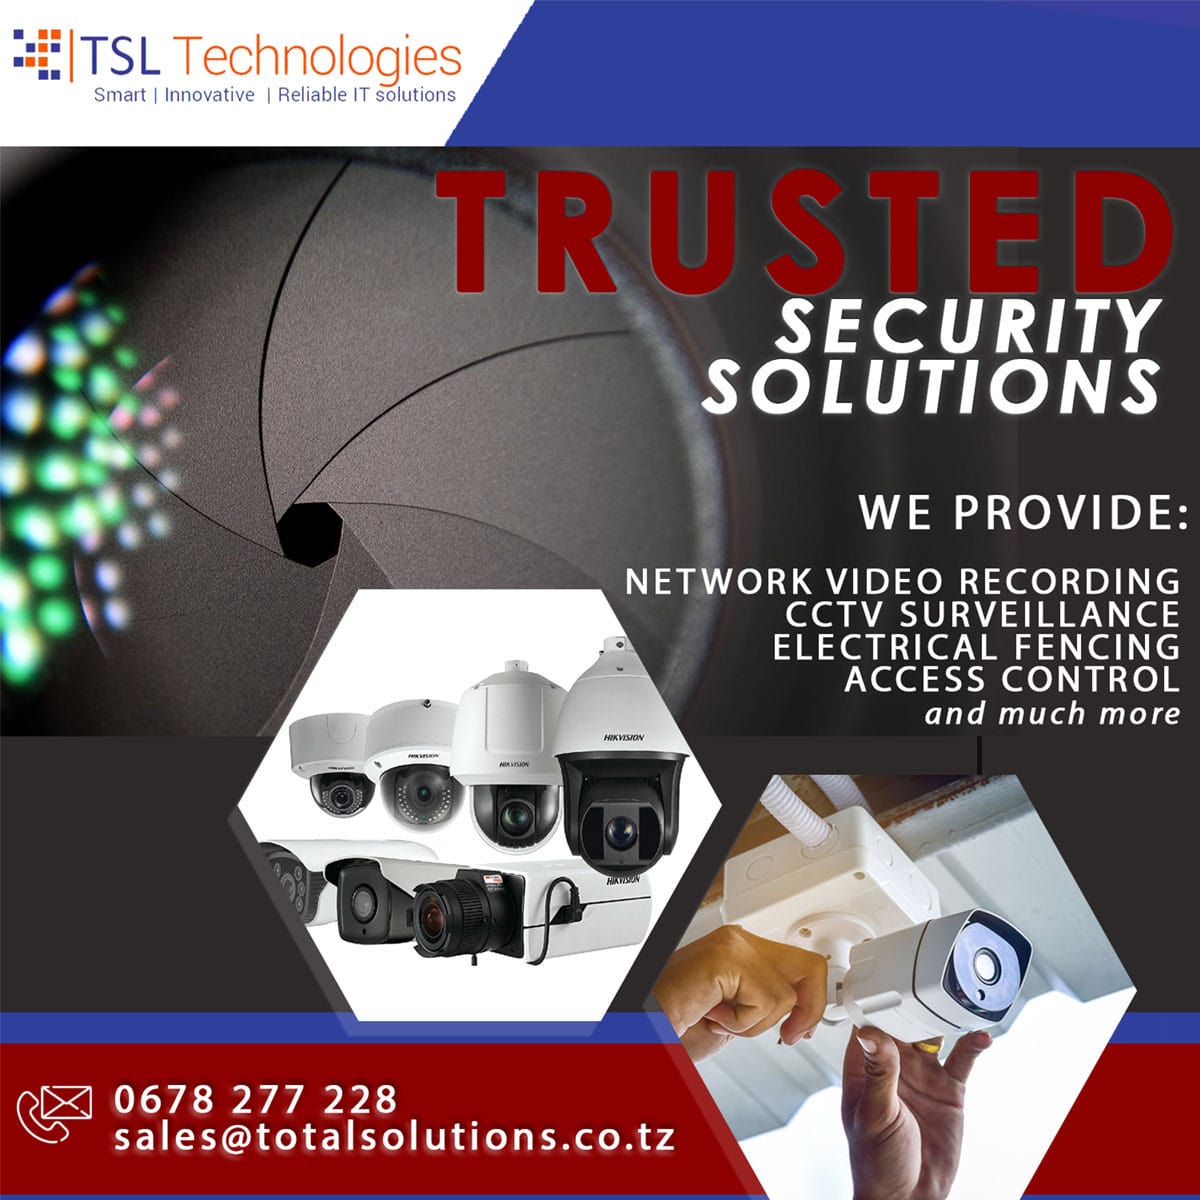 Security solutions